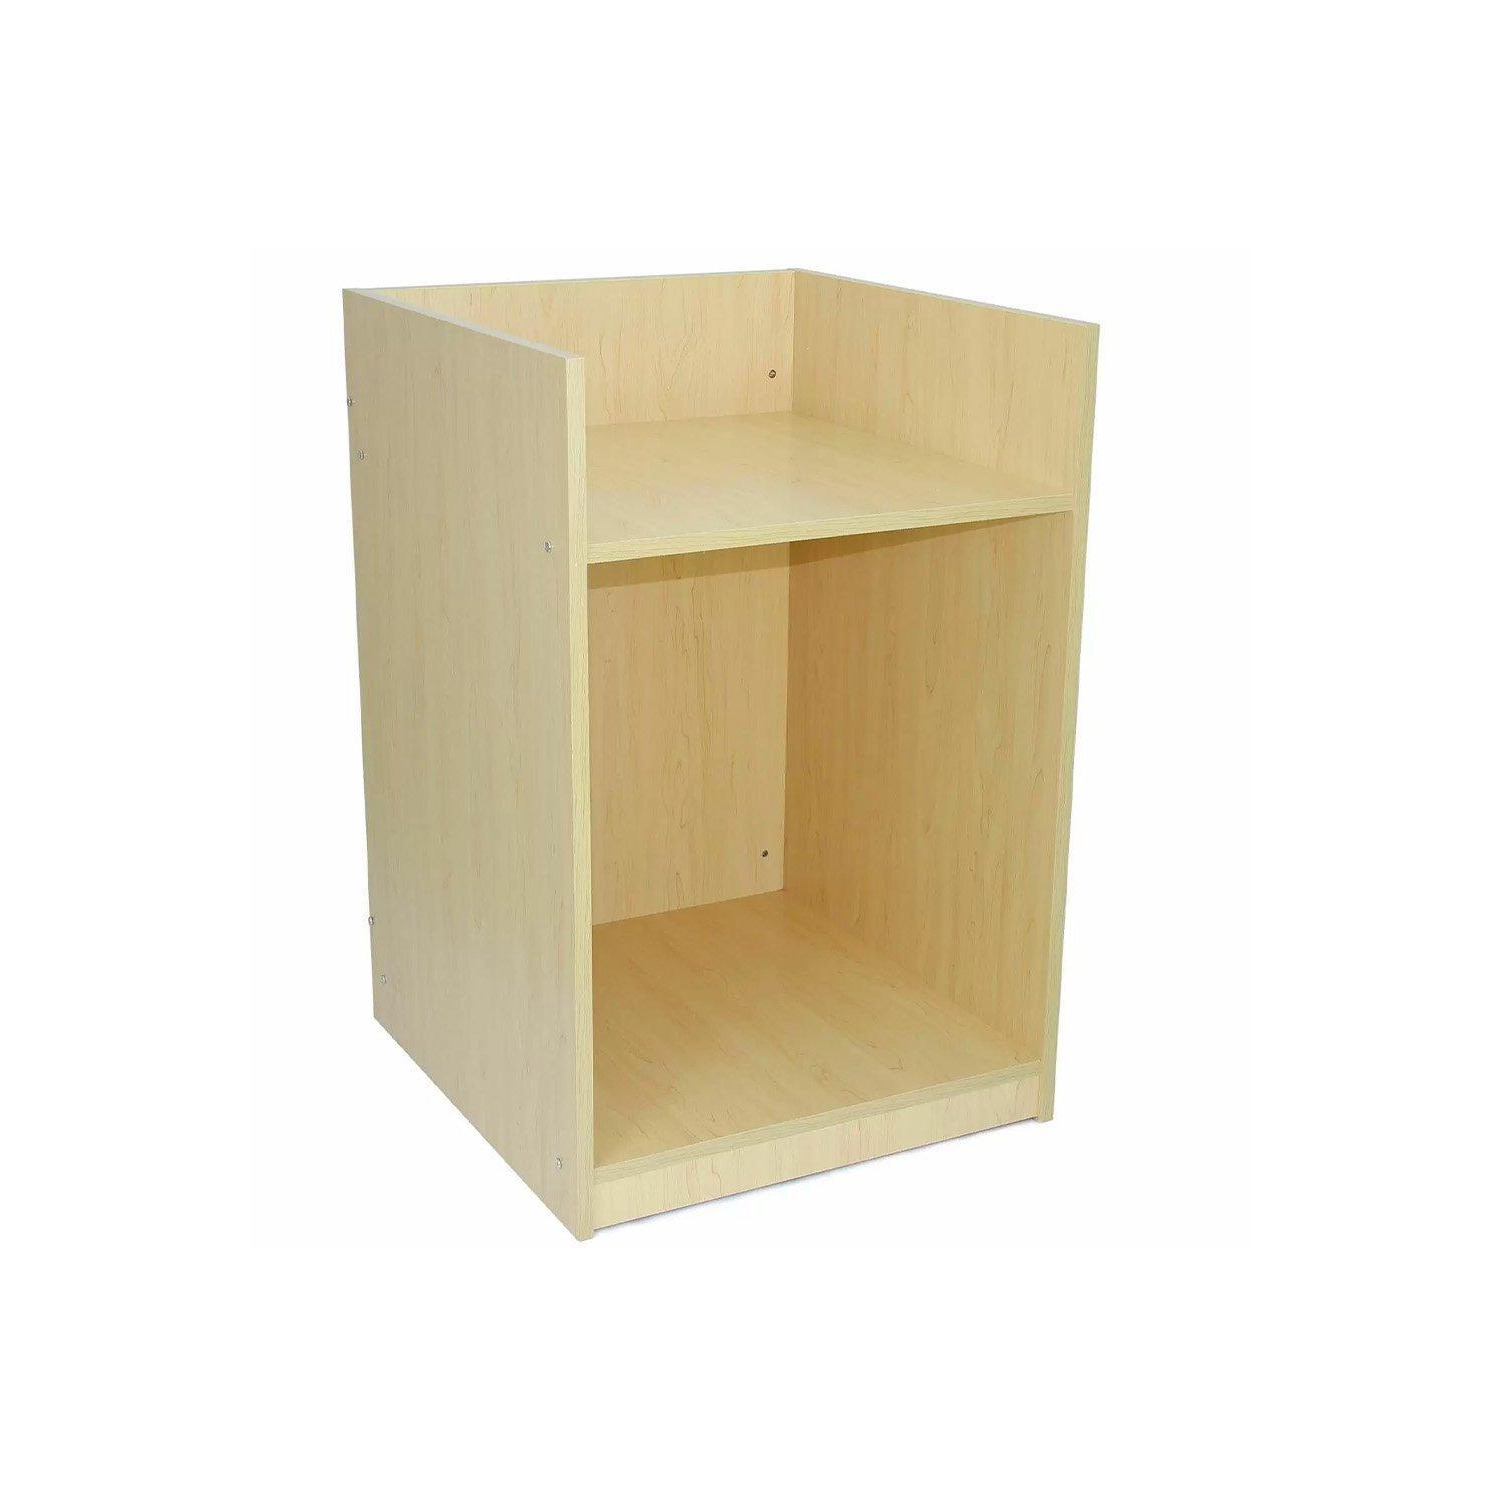 Retail Service Counter - Maple - image 1